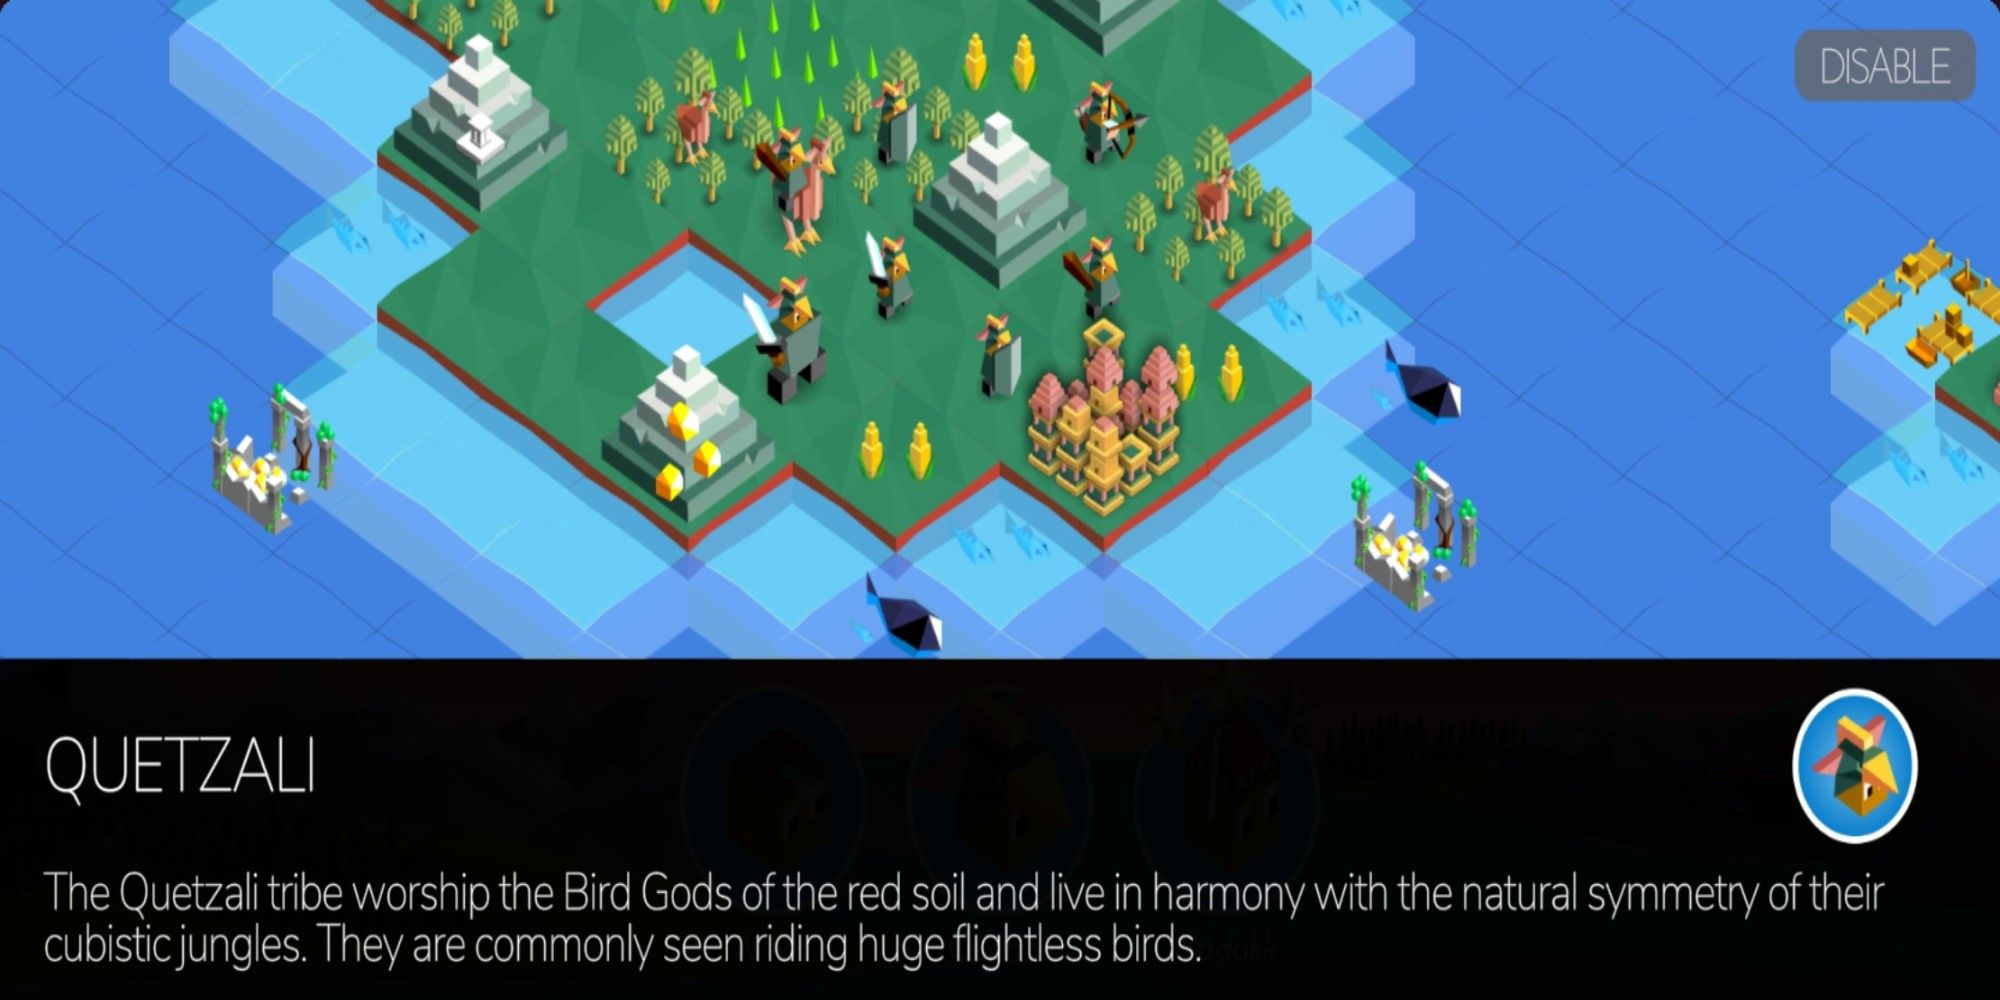 Information on the Quetzali Tribe from the Battle of Polytopia.